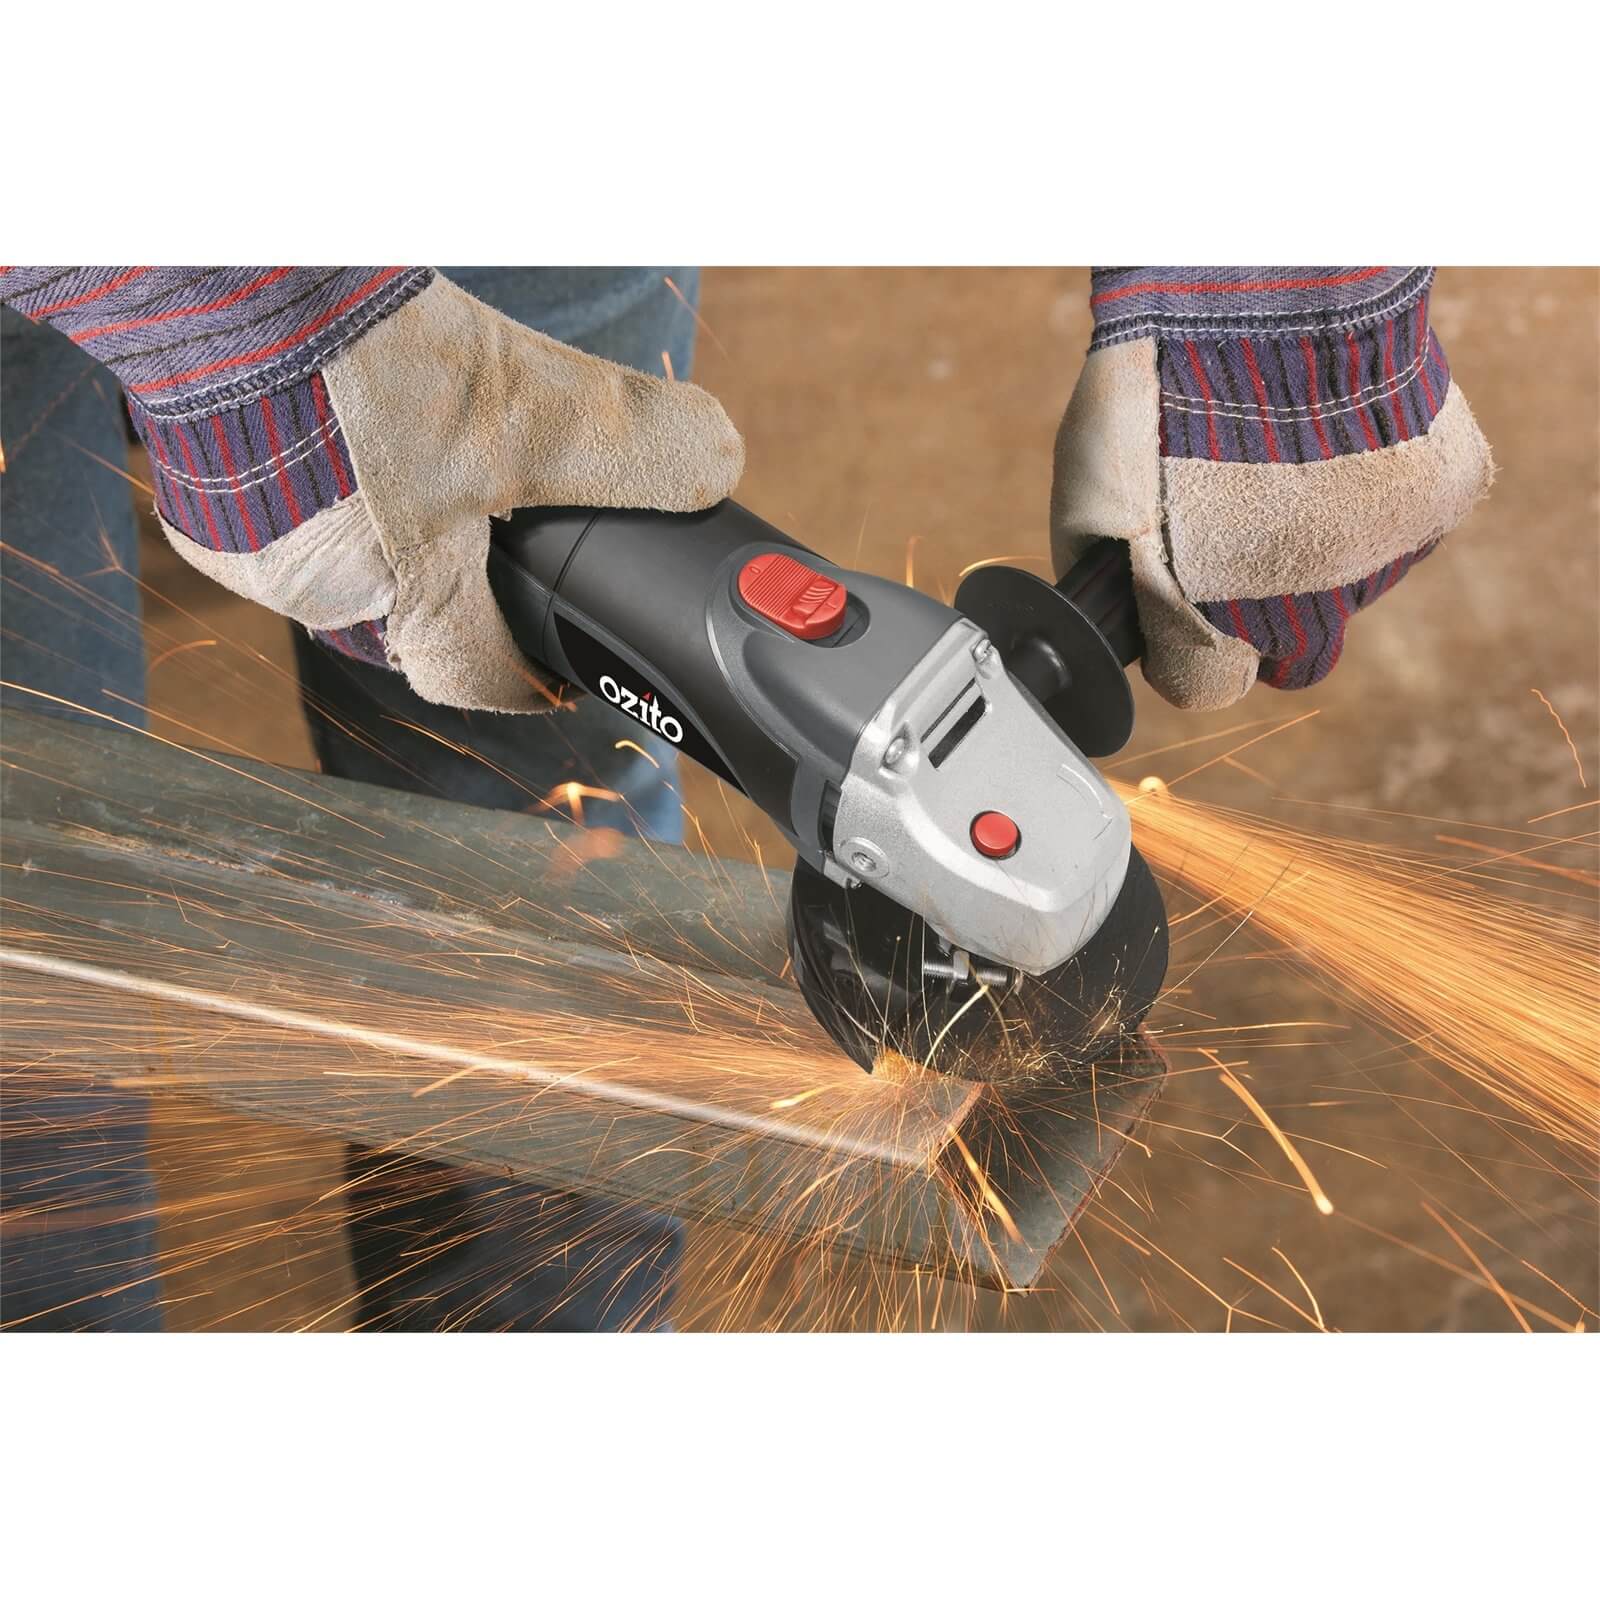 Ozito by Einhell 850W 115mm Angle Grinder